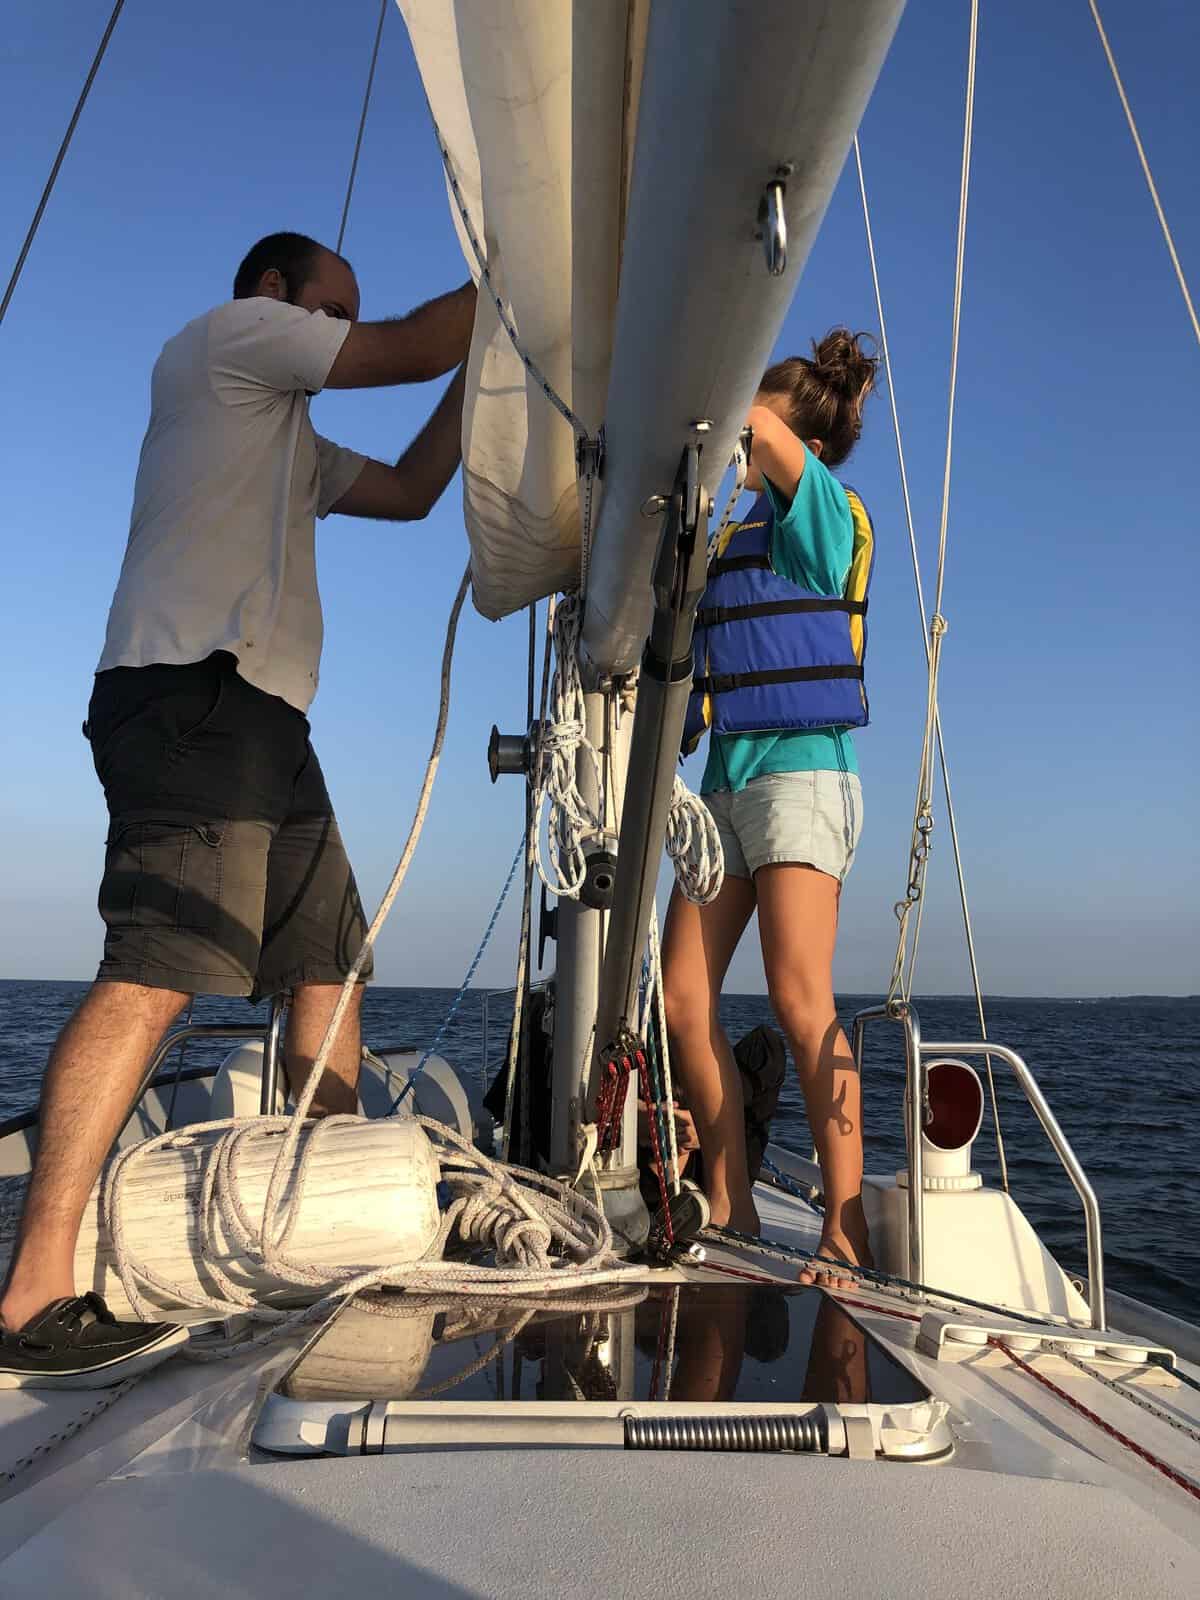 Joe and Sophie fixing a sail
